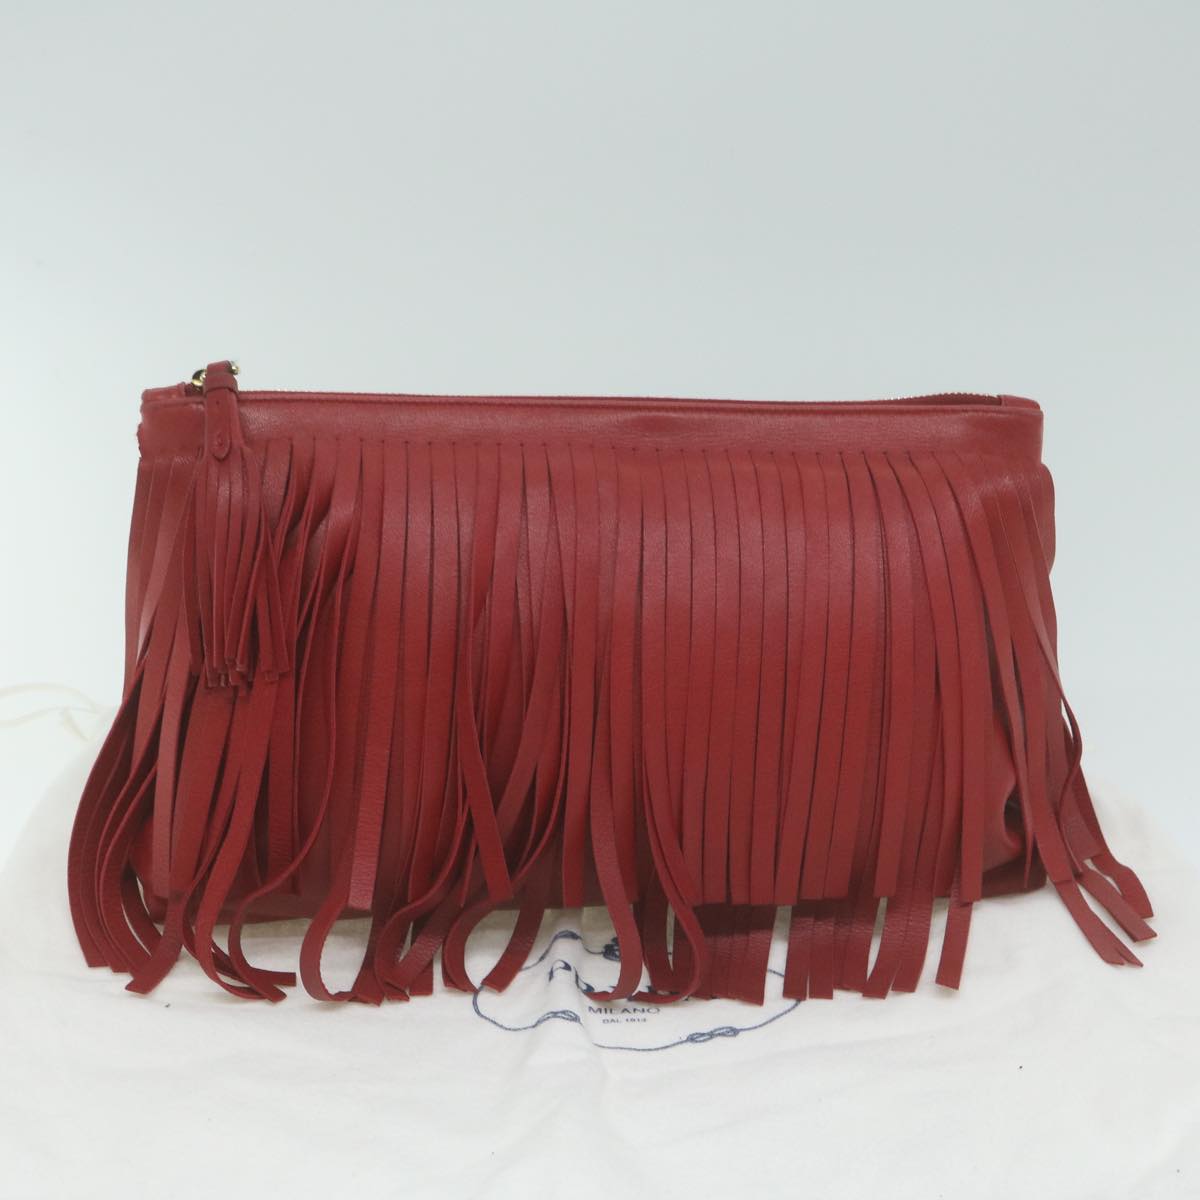 PRADA Clutch Bag Leather Red Auth bs11809